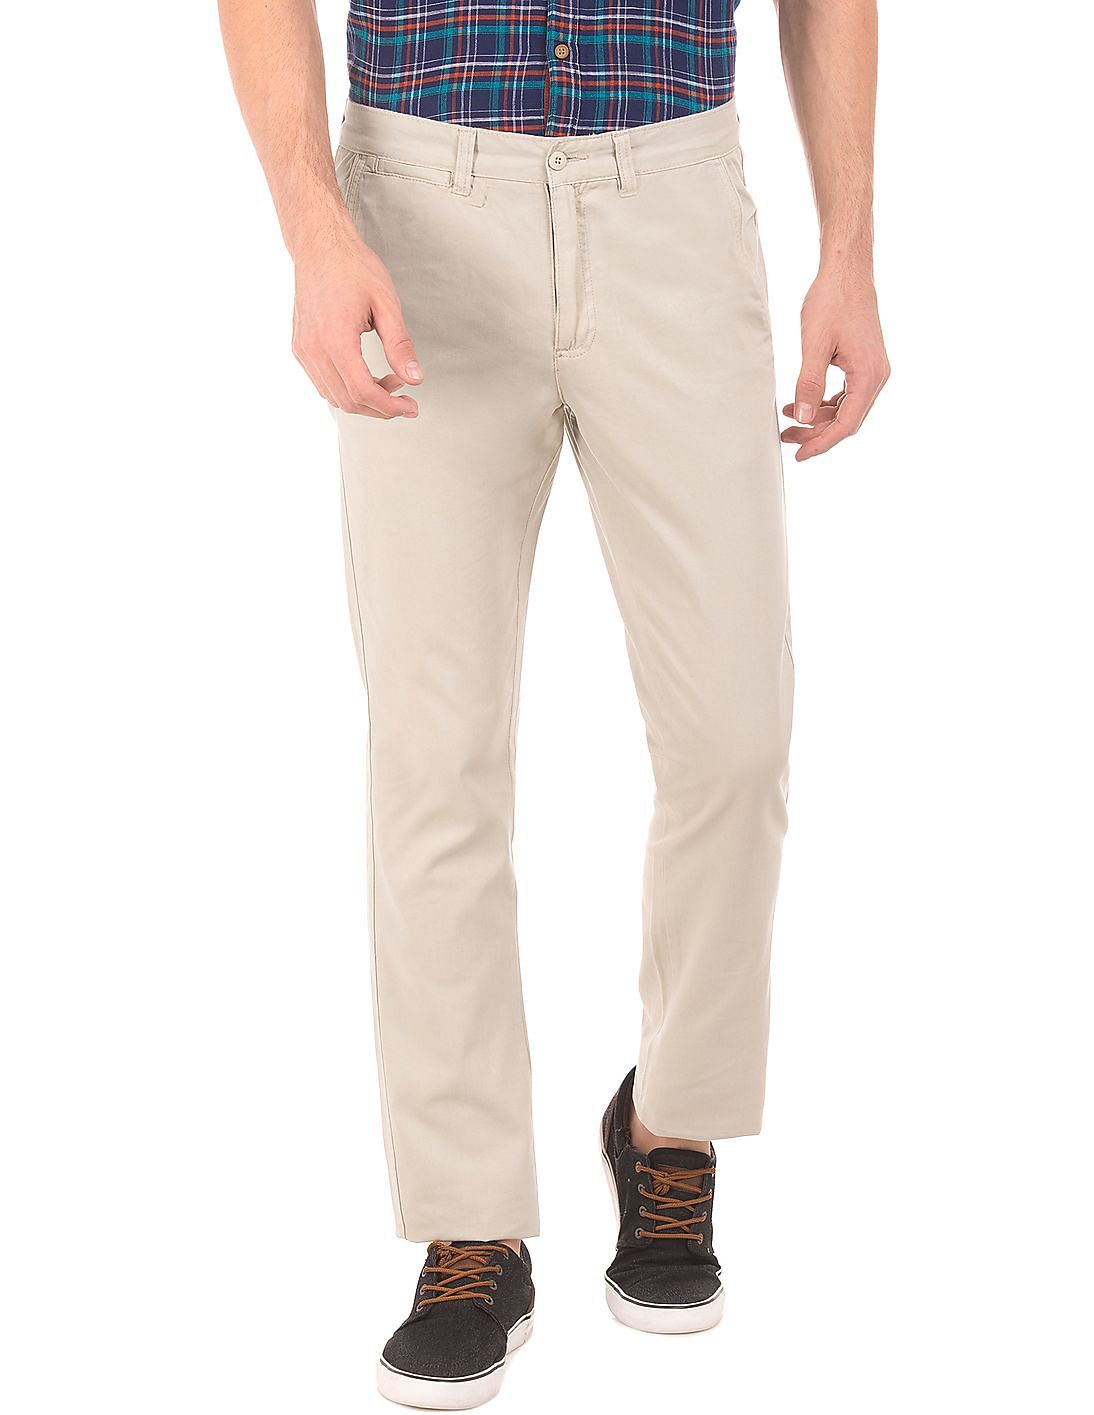 Buy Ruggers Slim Fit Twill Trousers - NNNOW.com